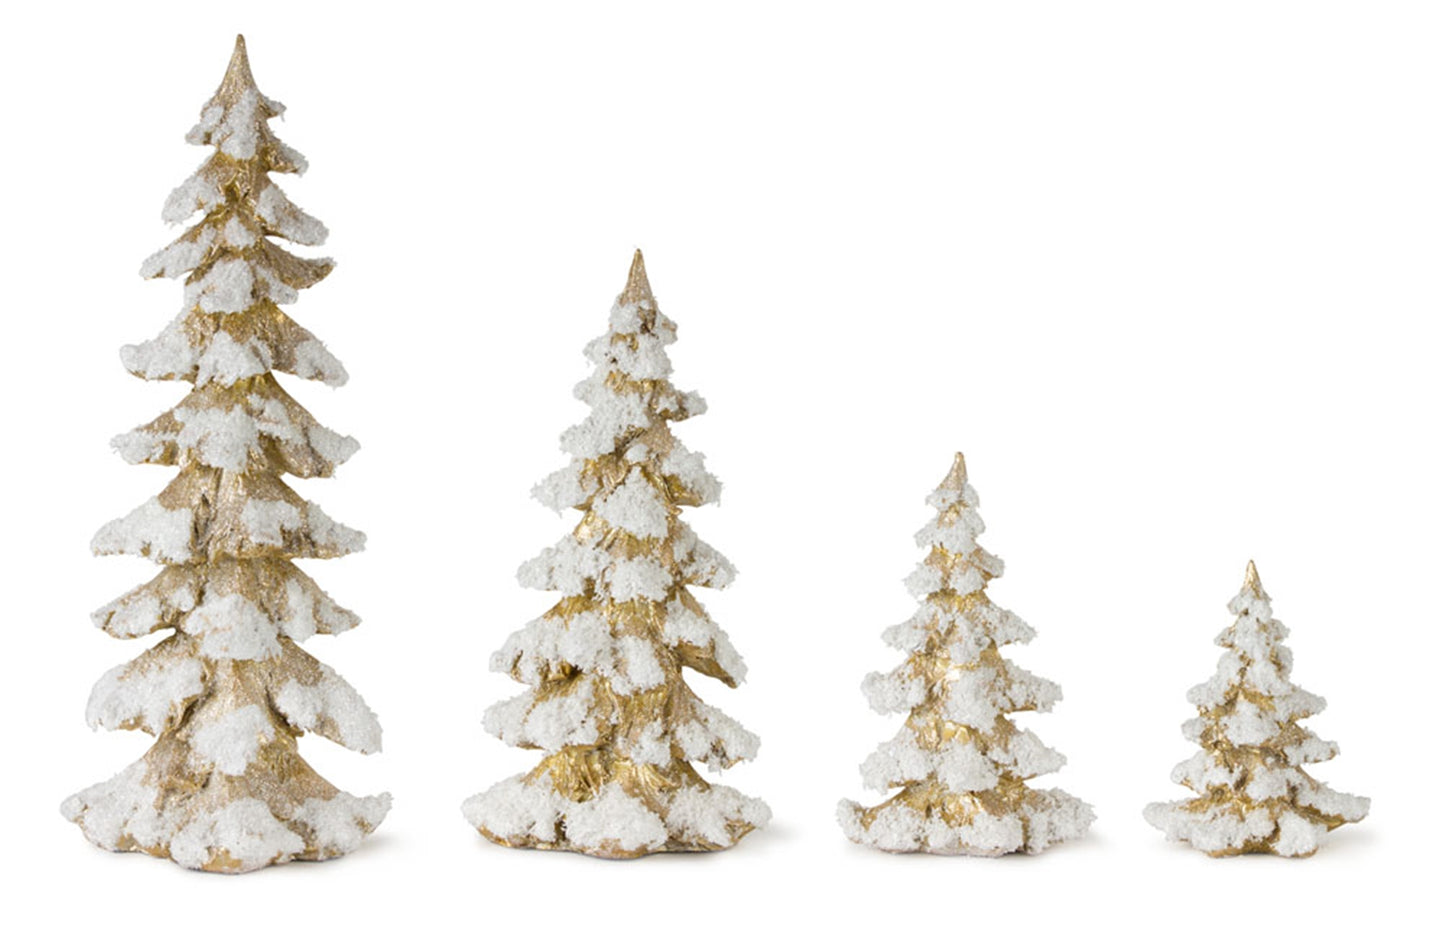 Resin Trees Choice of 6.5"H, 9"H, 13.25"H or 18"H